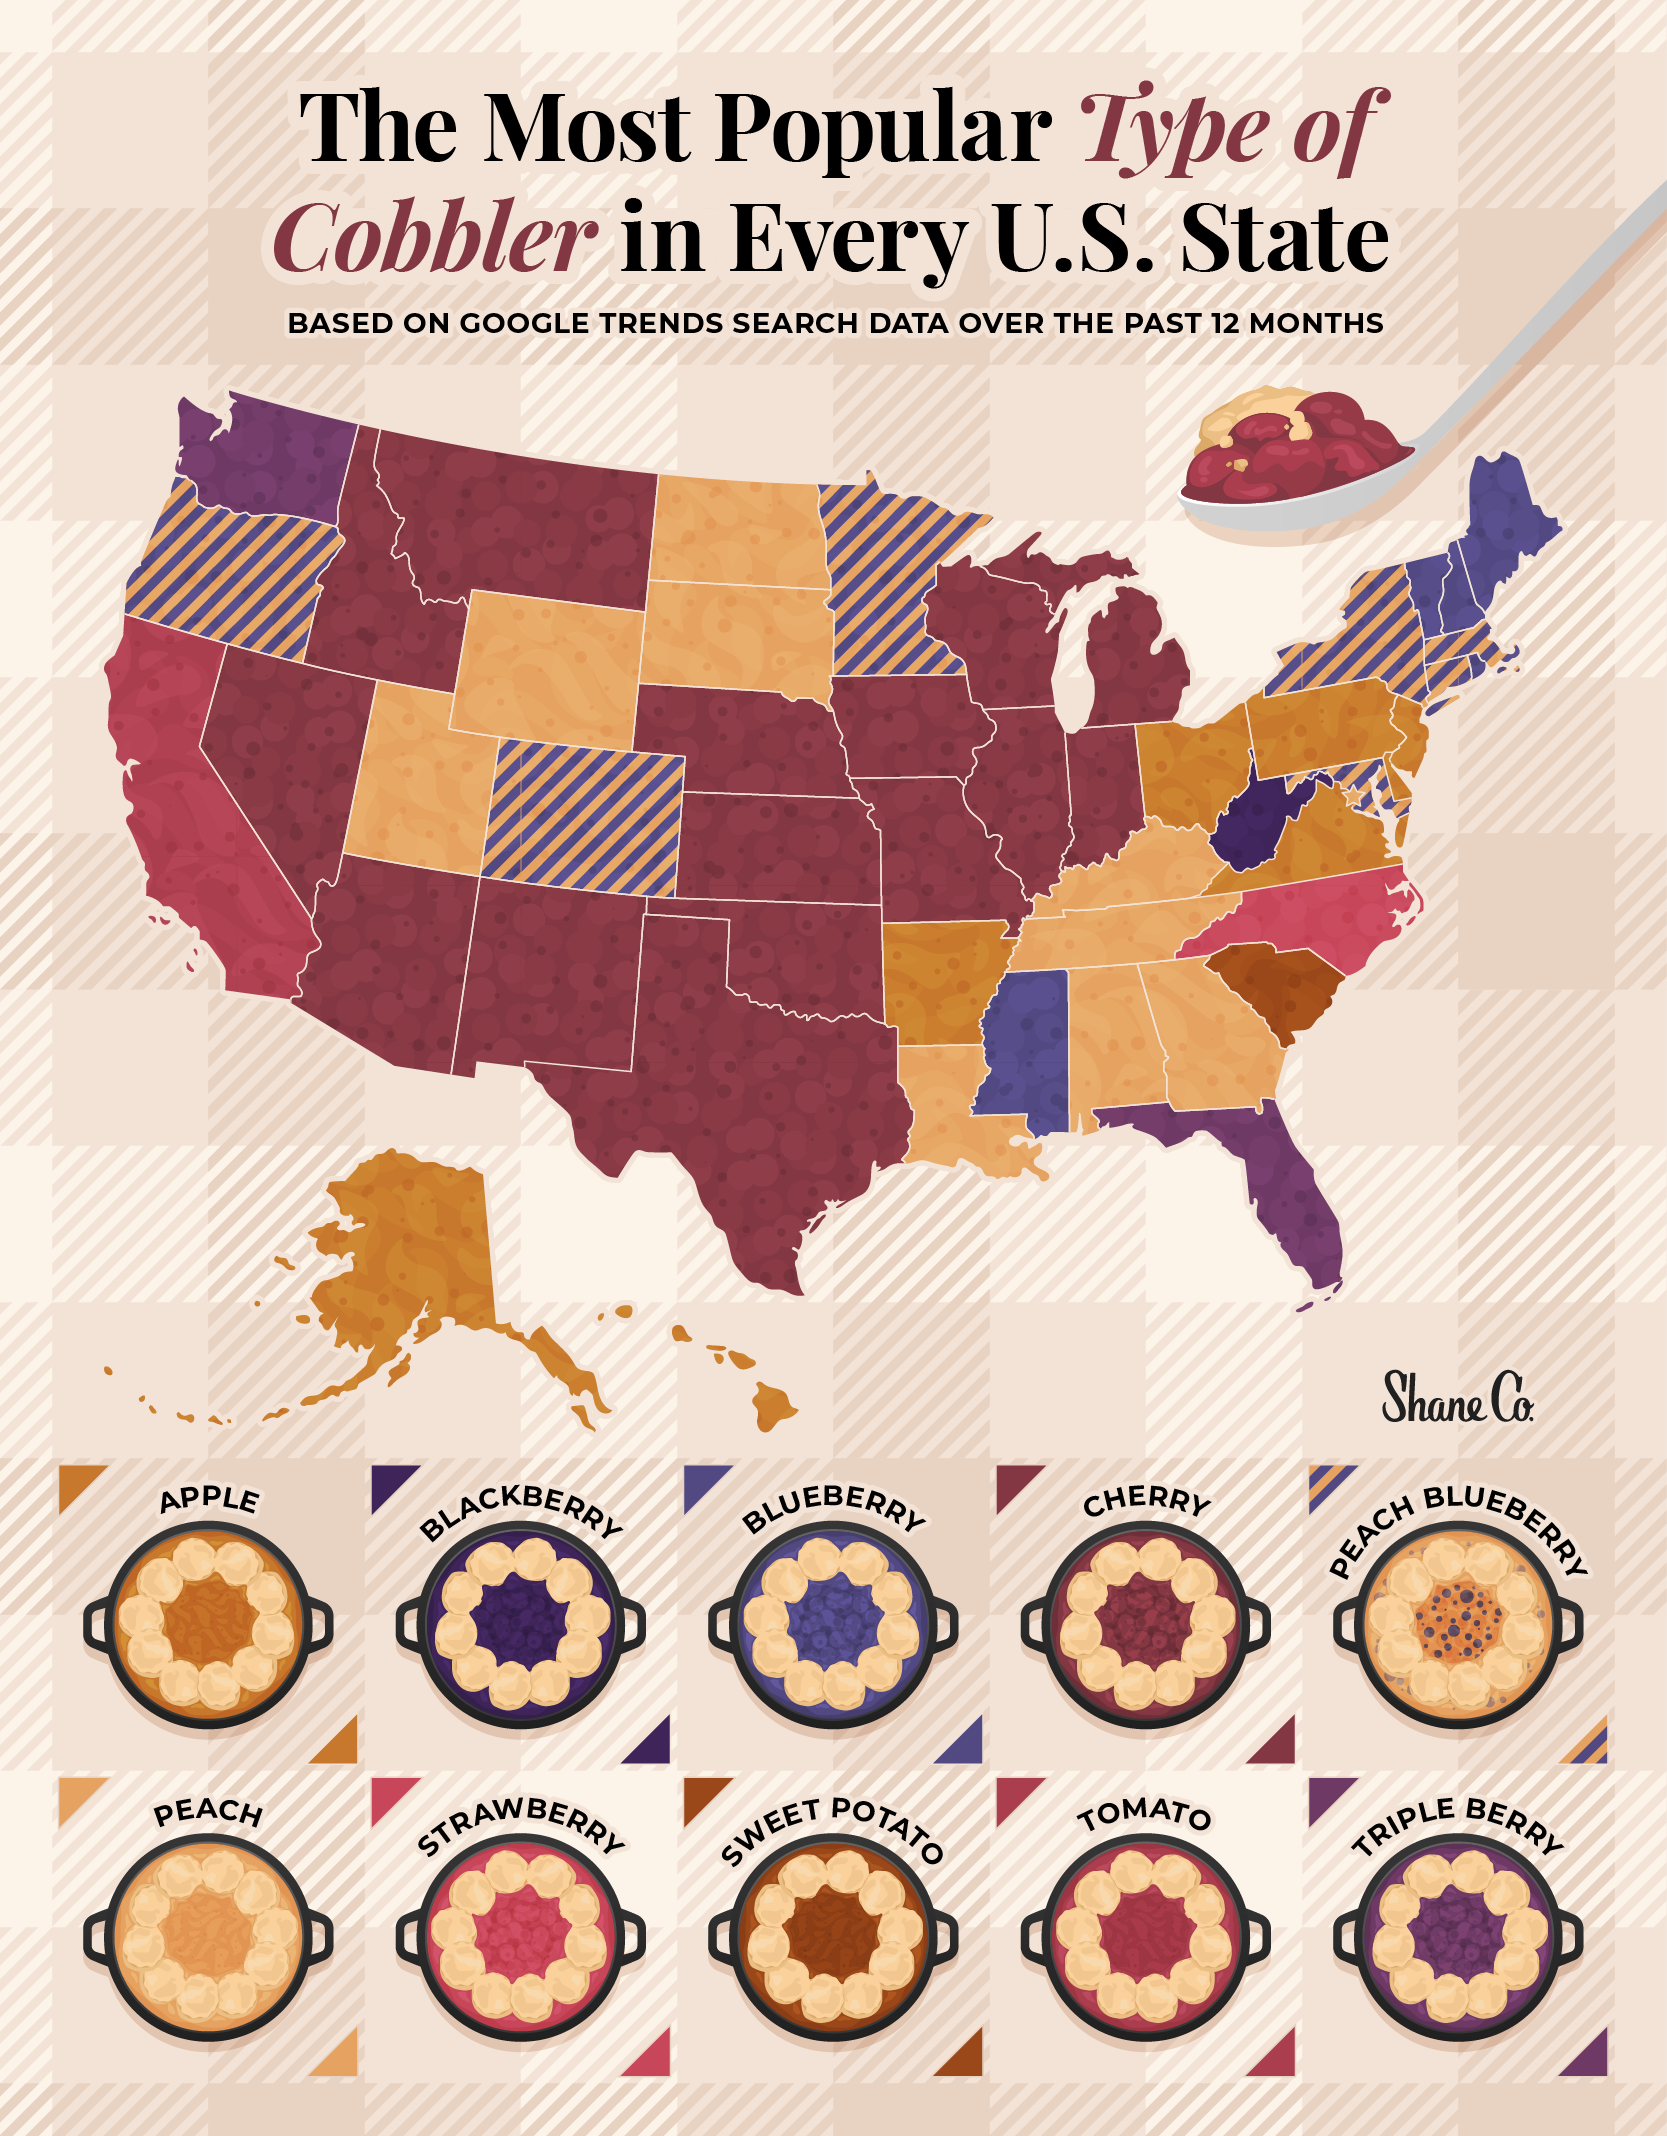 U.S. map with the most popular type of cobbler in every U.S. state